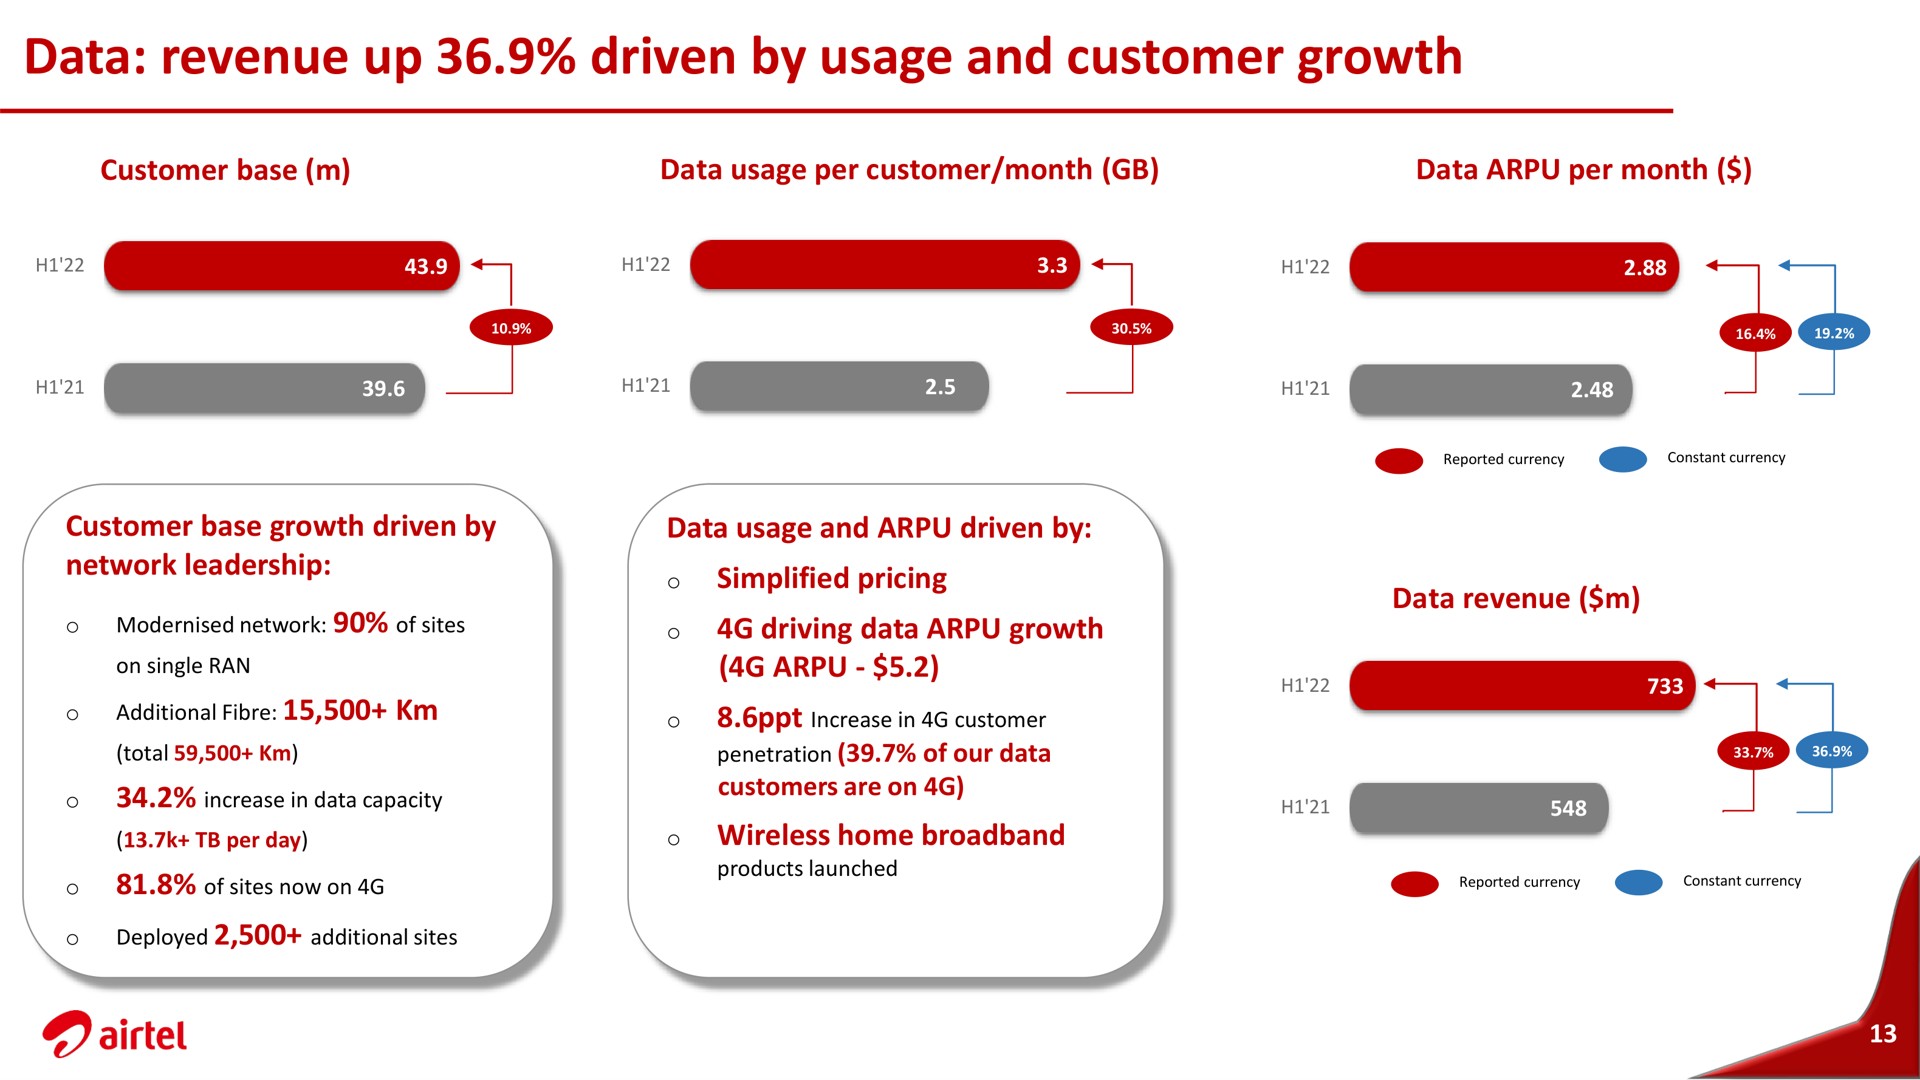 data revenue up driven by usage and customer growth | Airtel Africa